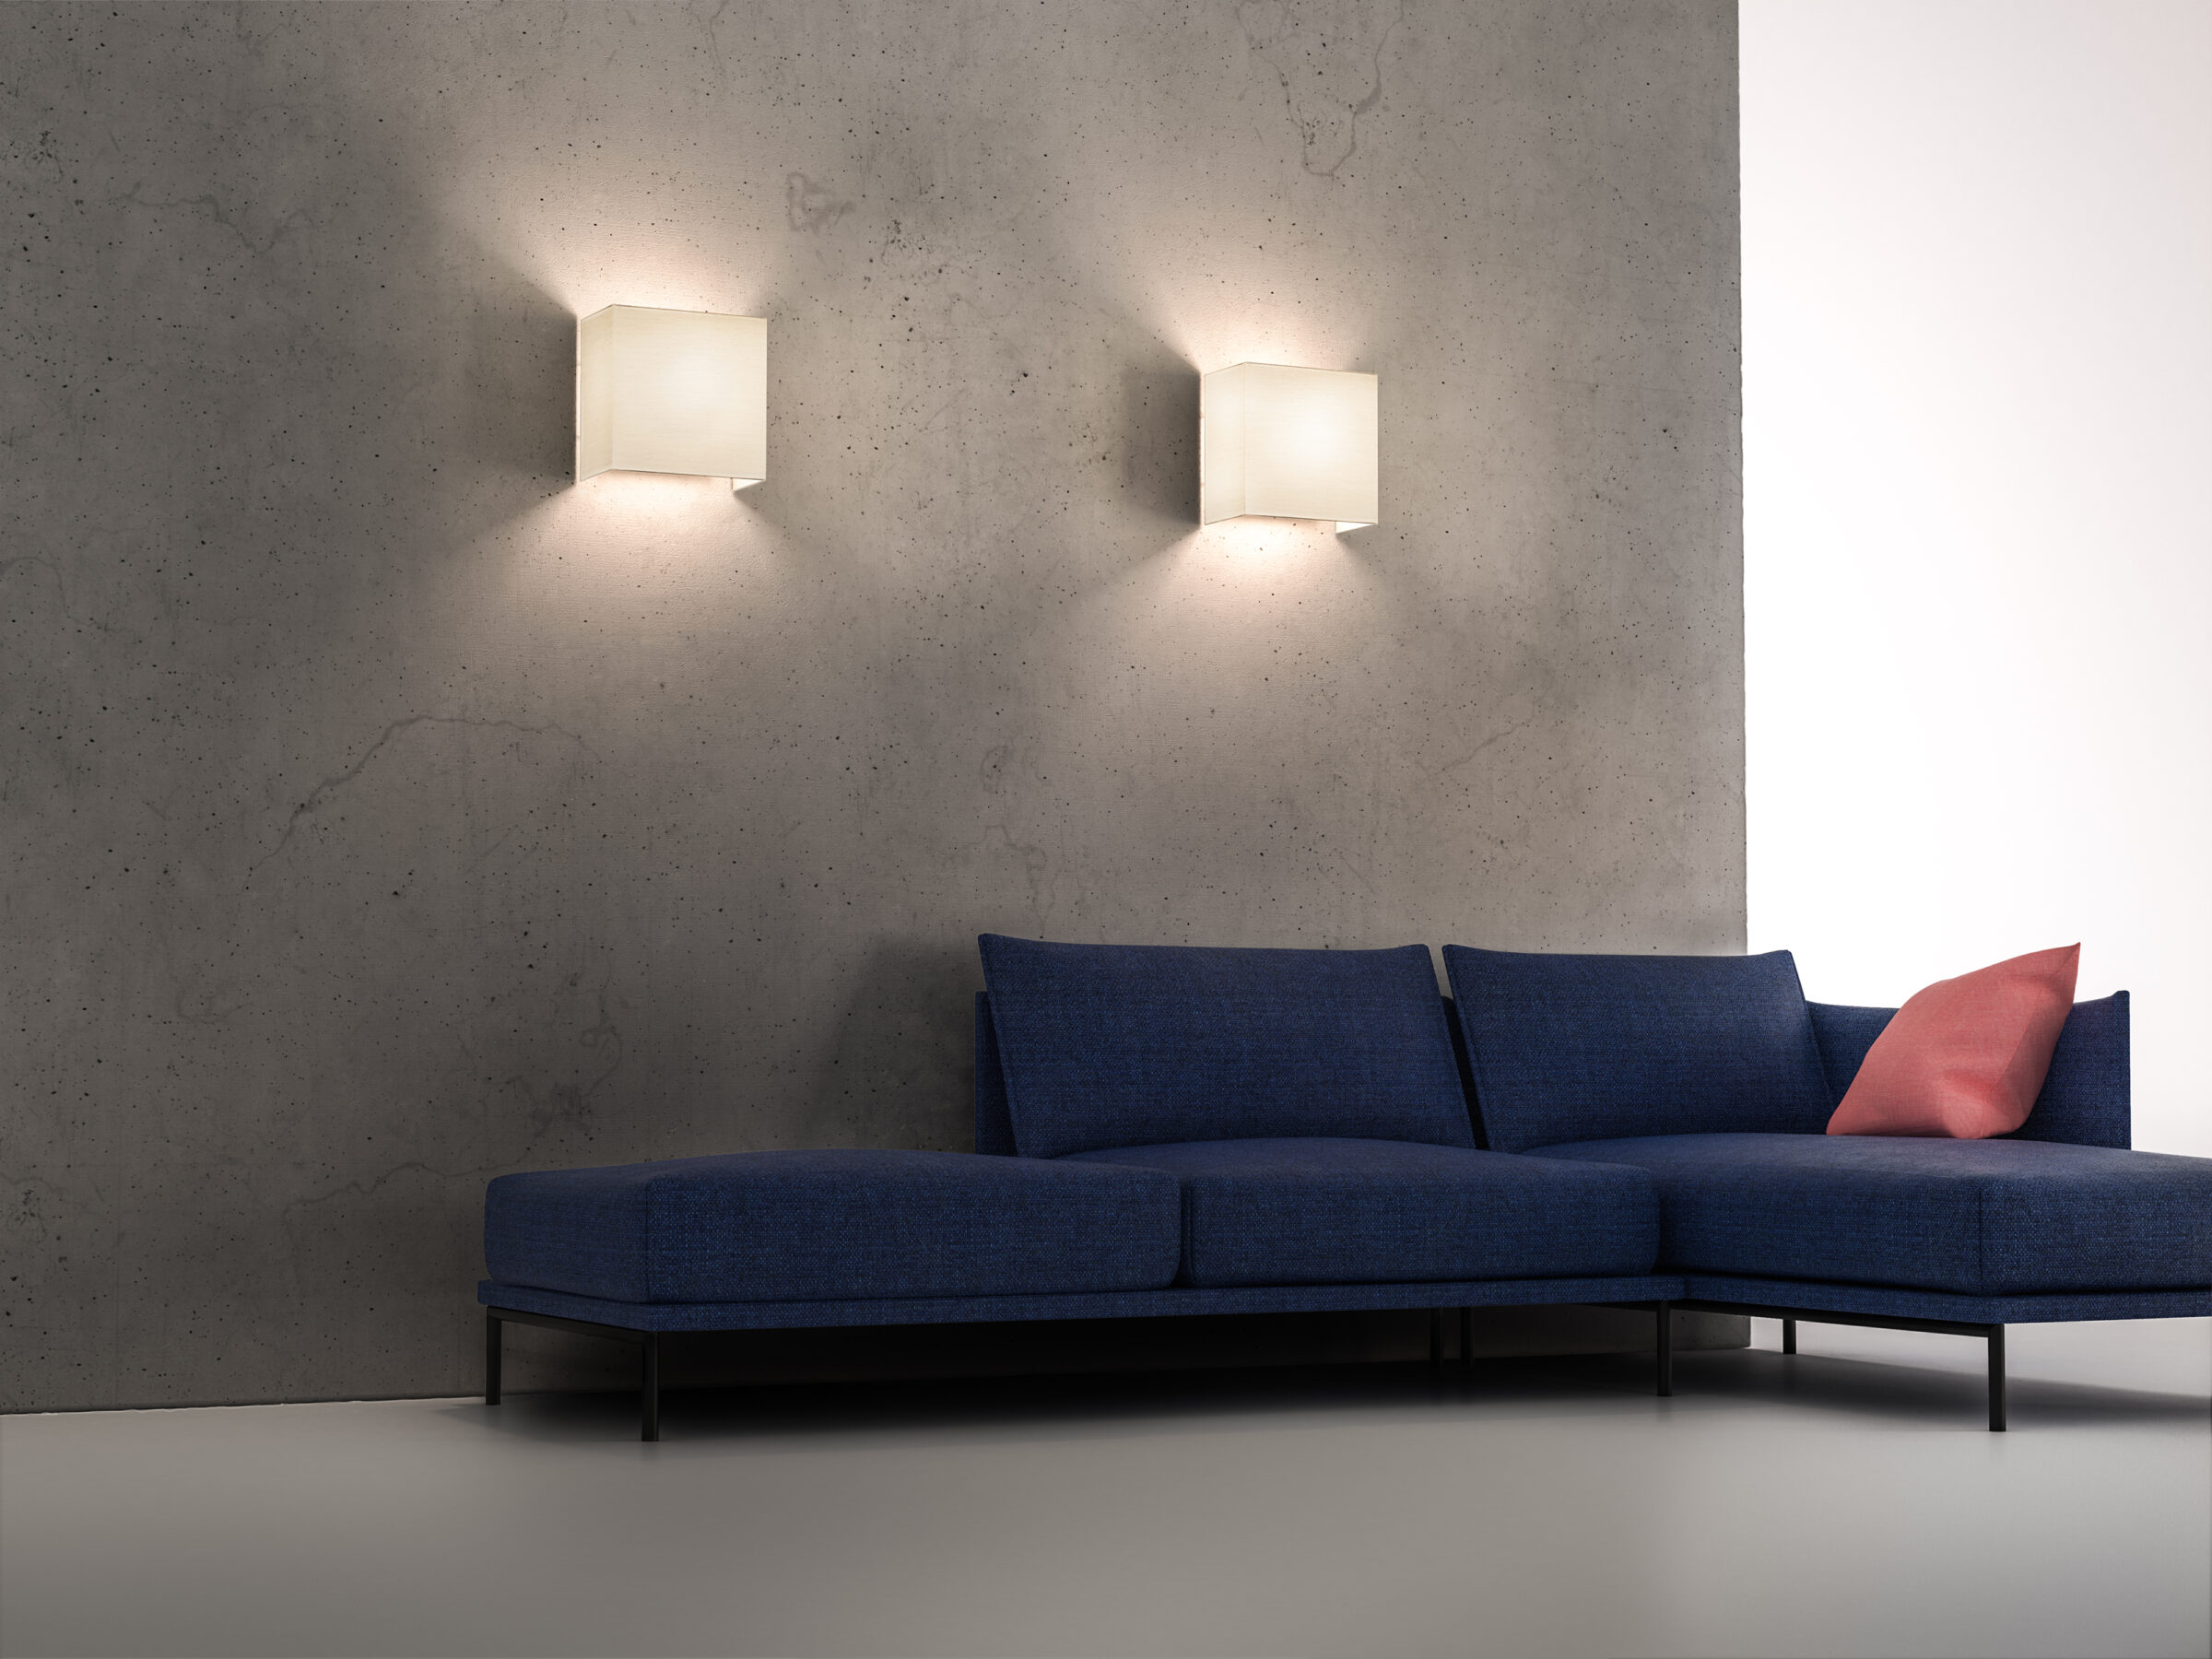 Two CUBIC BOX wall lamps in white on concrete wall above blue sofa.